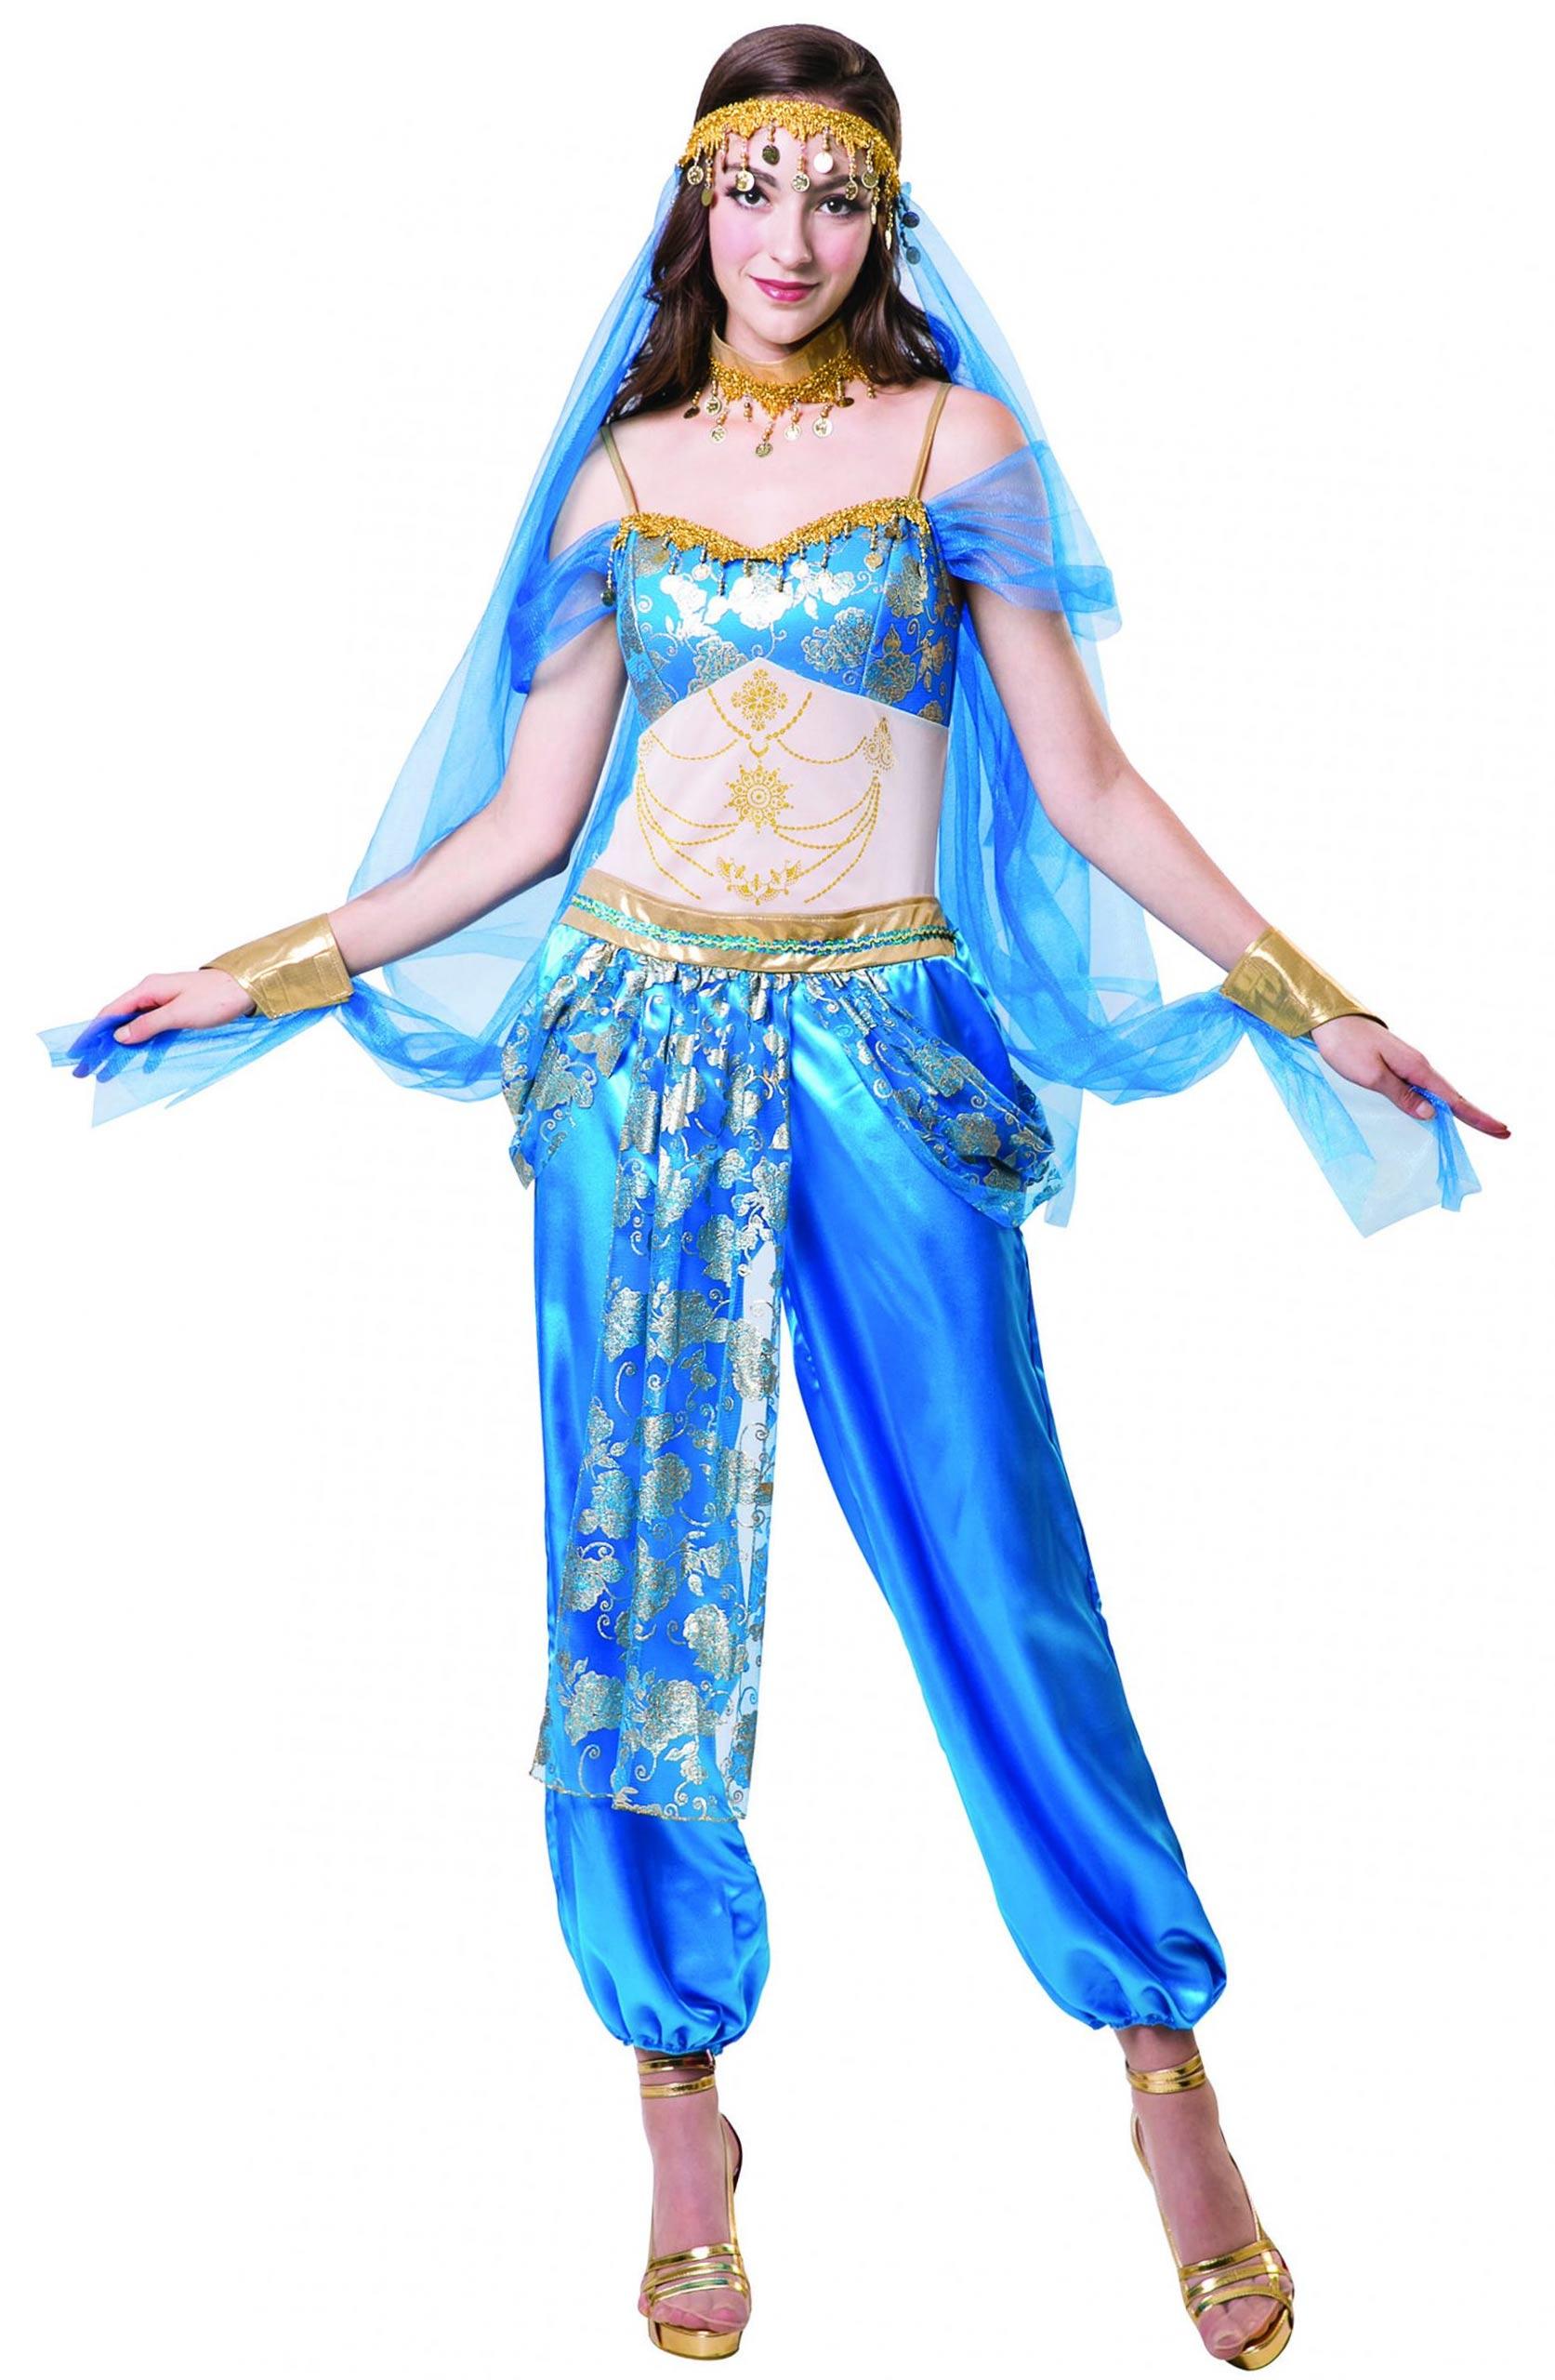 Exotic Harem Dancer Adult Costume by Bristol Novelties AF072 available from a selection of exotic outfits here at Karnival Costumes online party shop